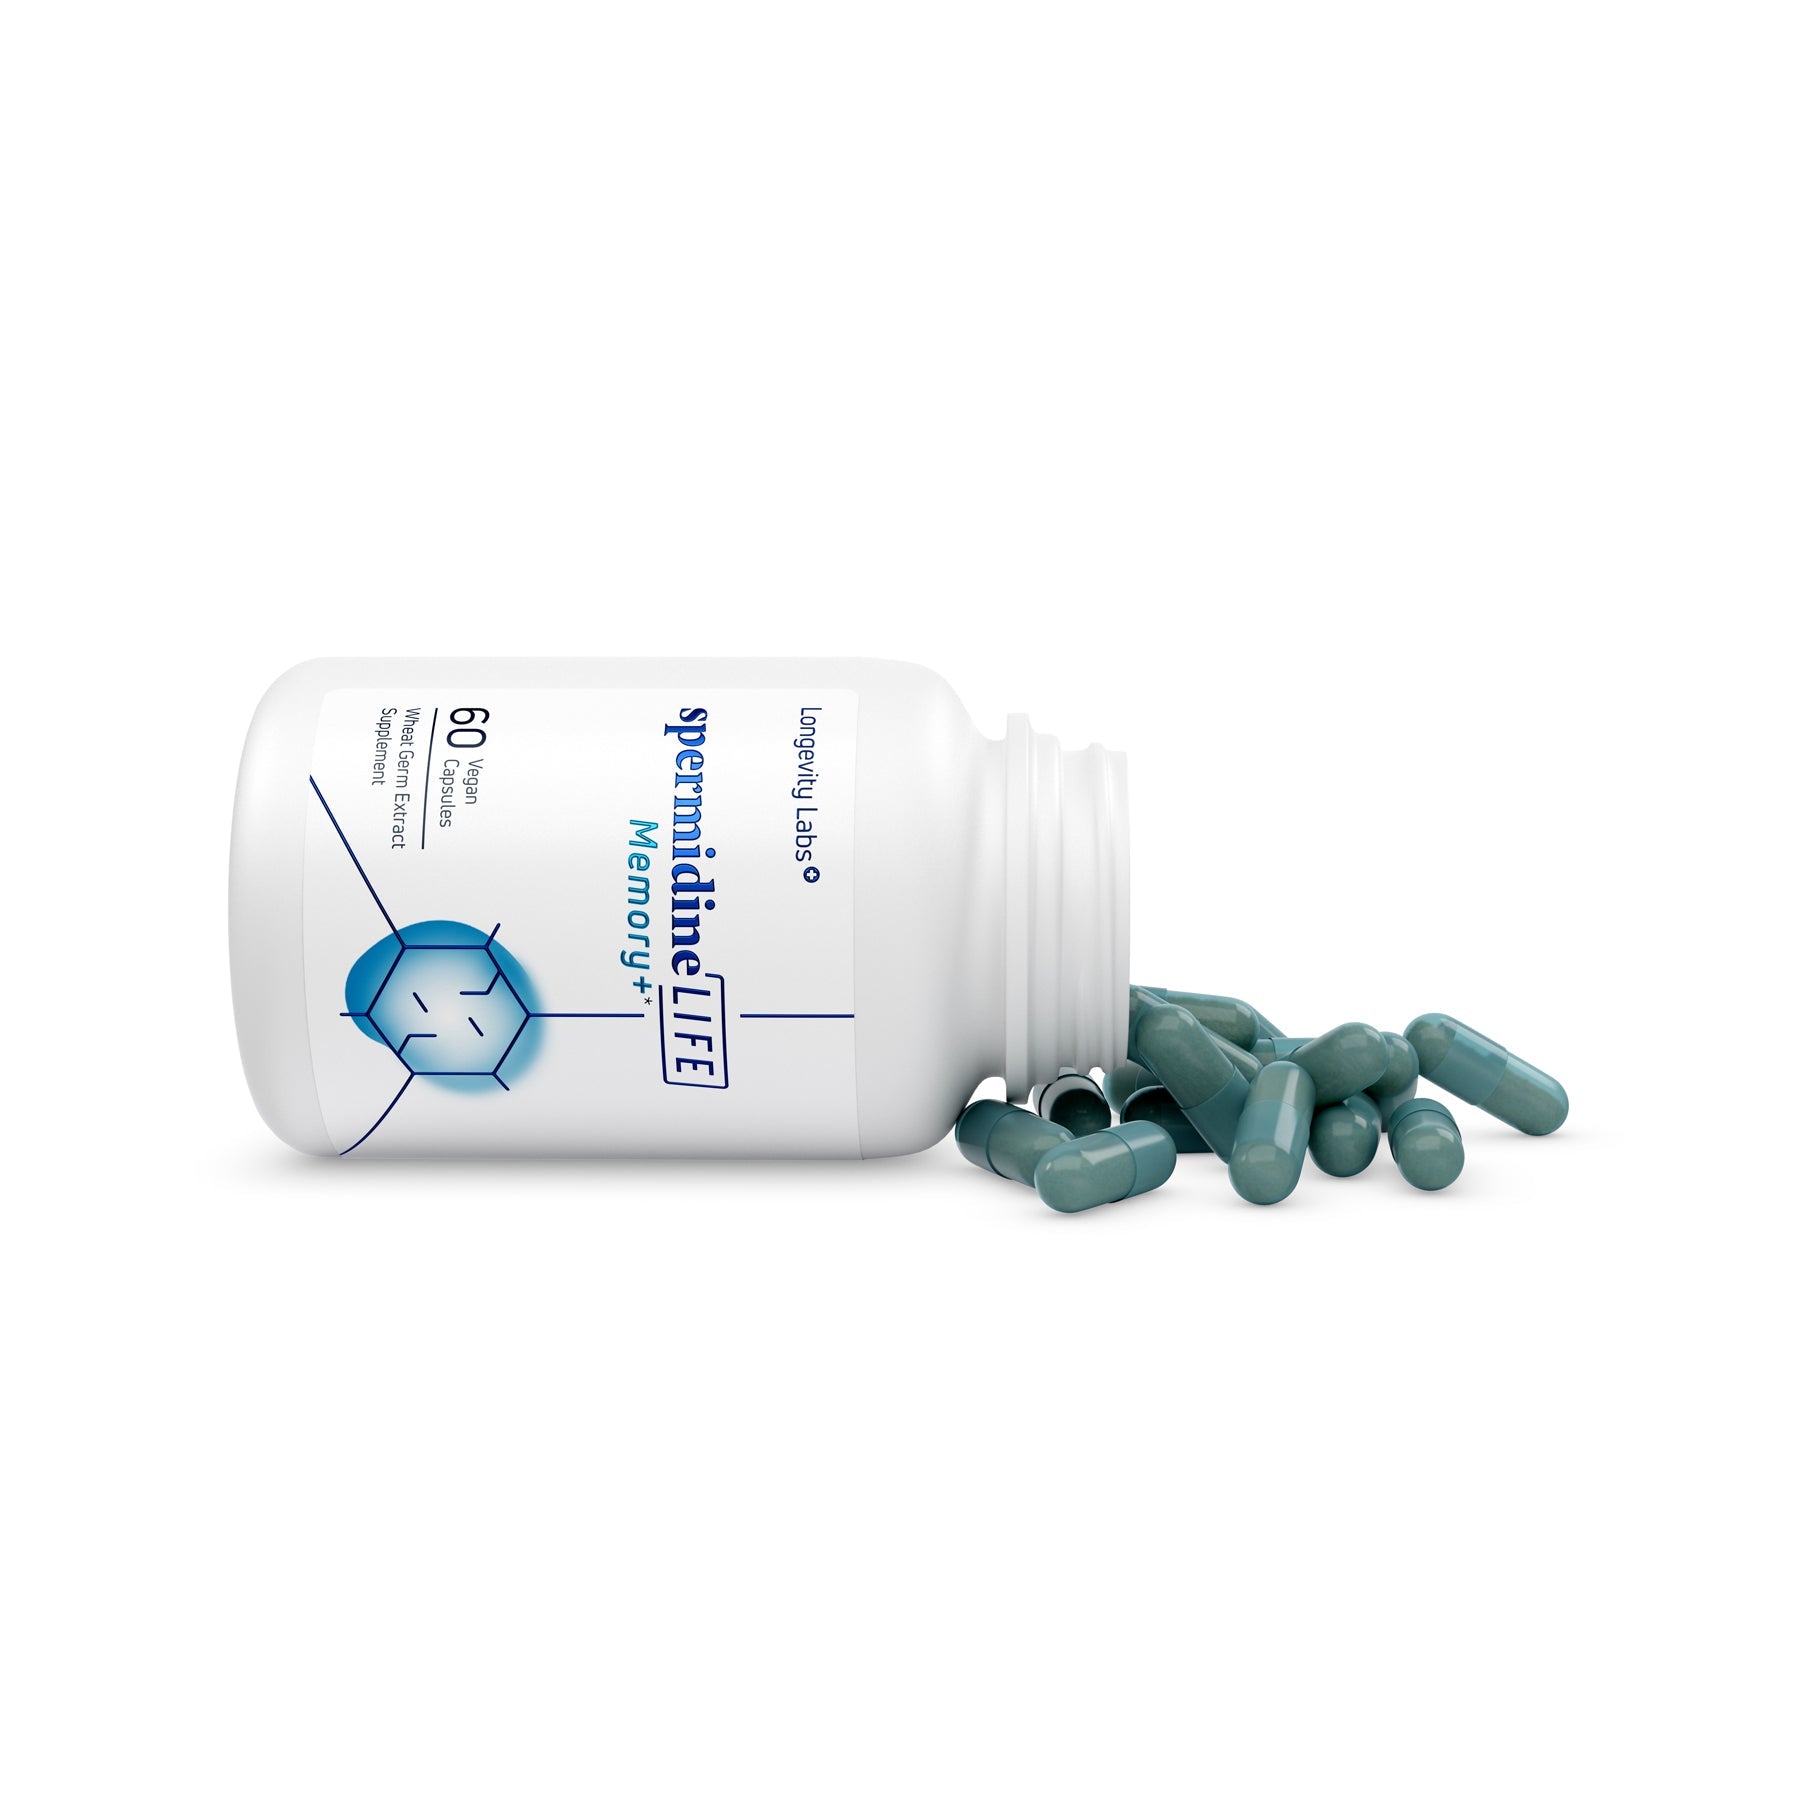 spermidineLIFE Memory+ bottle on its side with pills